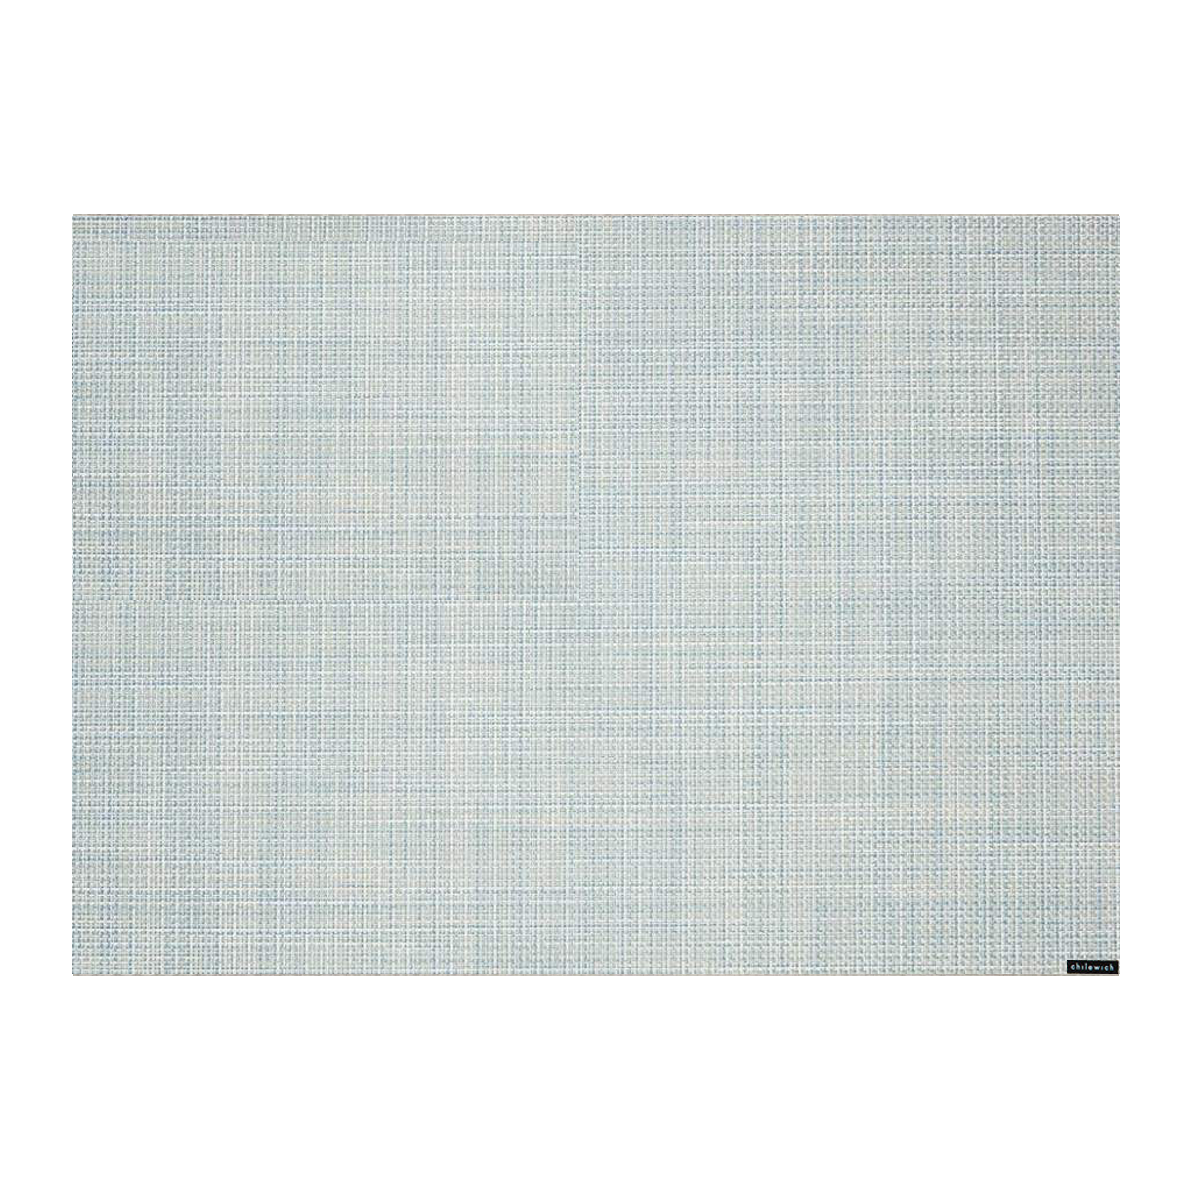 Chilewich Mini Basketweave Rectangle Placemat - Sky